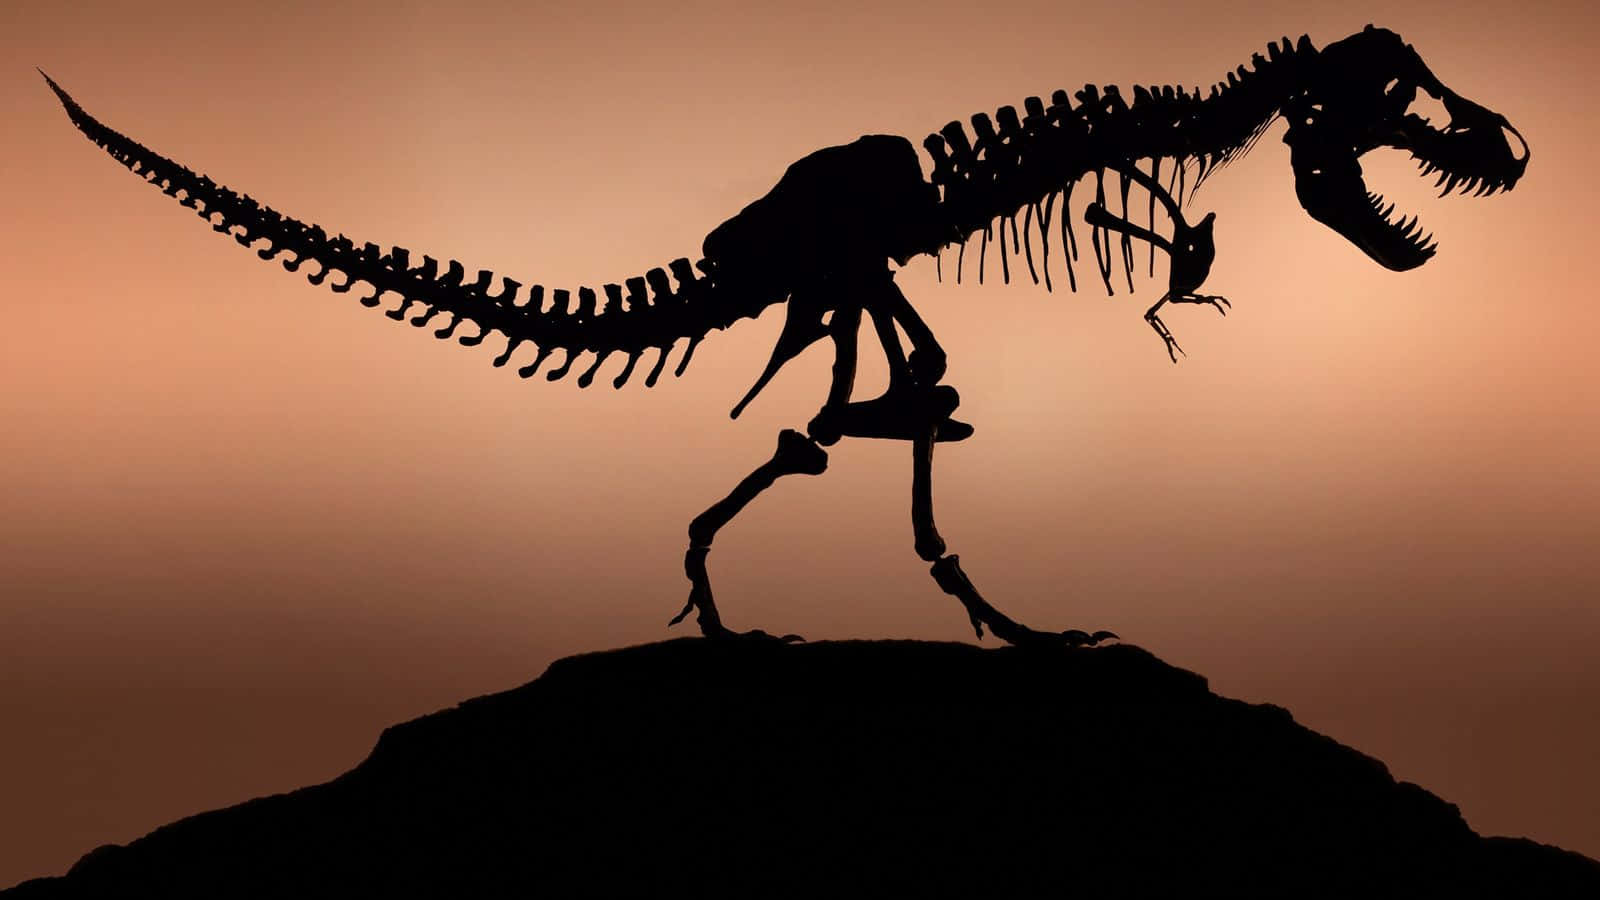 A T - Rex Skeleton Is Silhouetted On A Rock